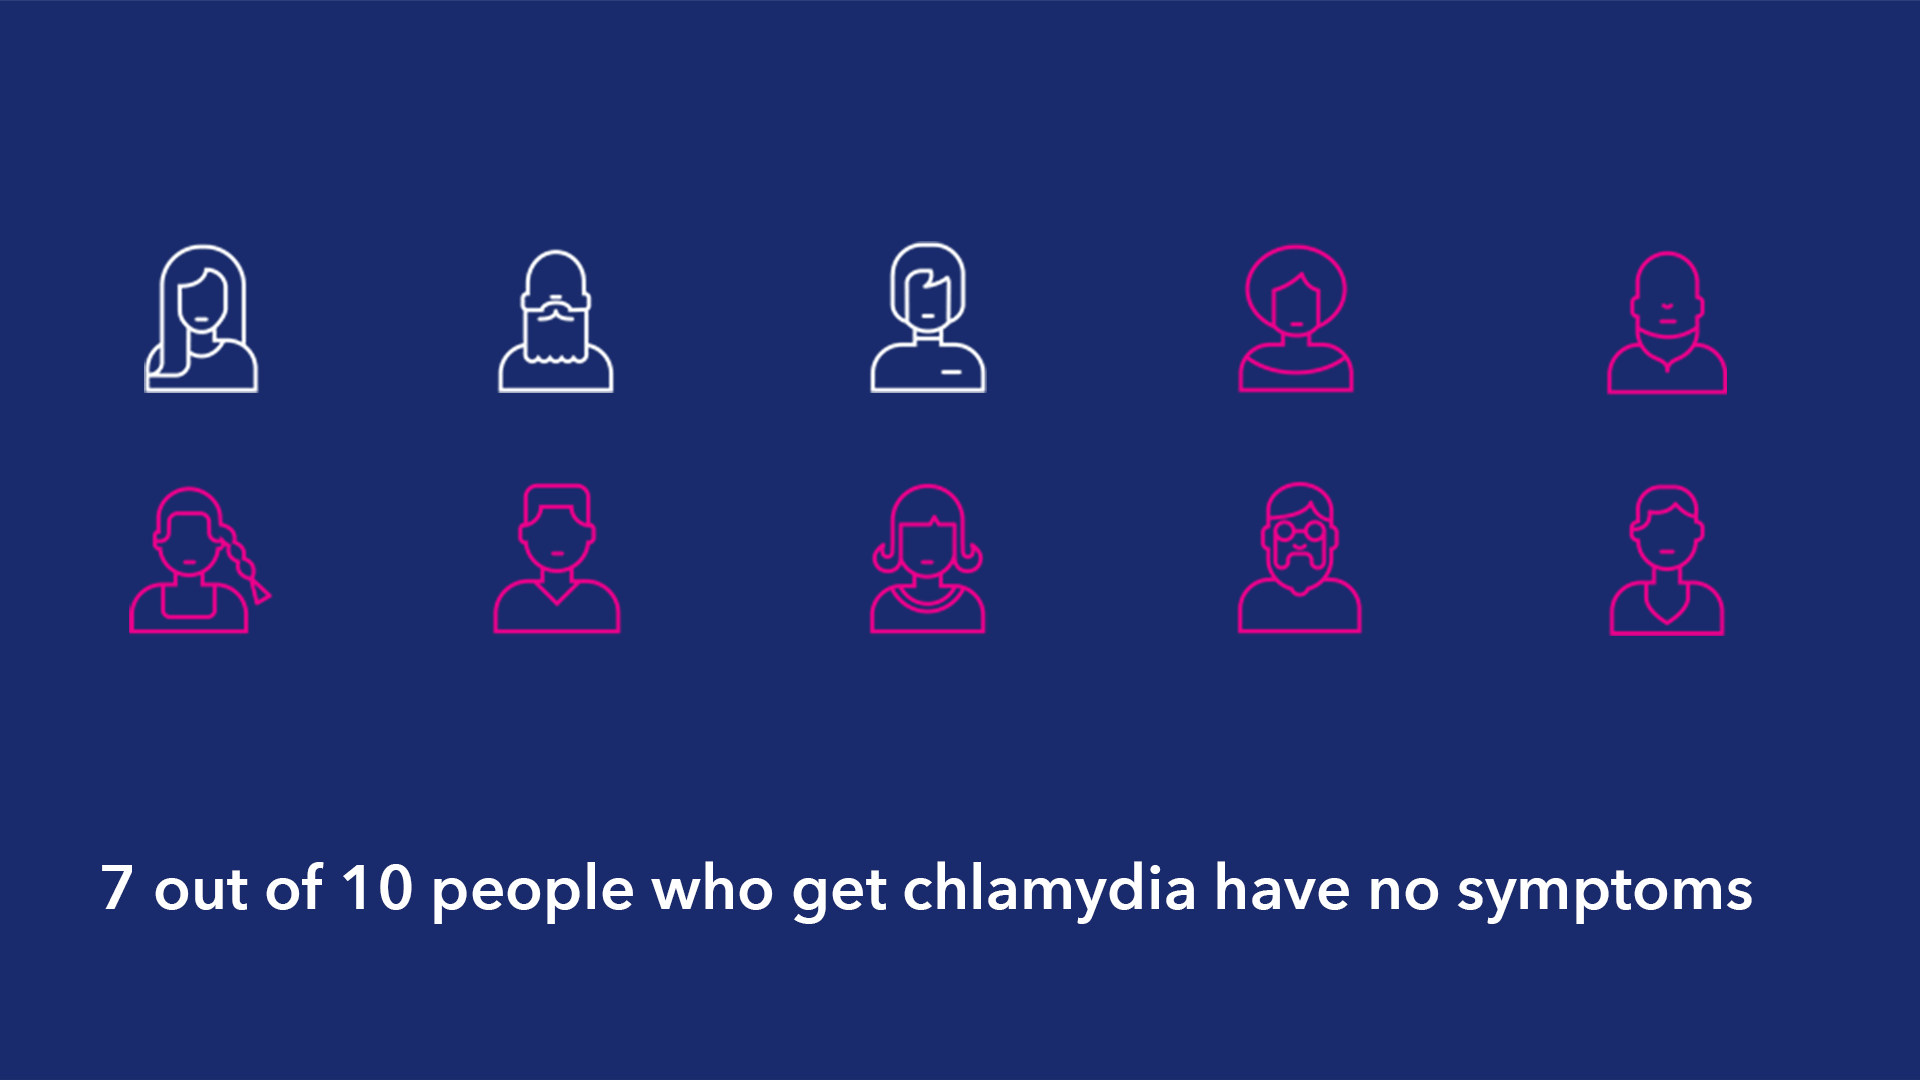 What Are the Symptoms Of Chlamydia In Women?